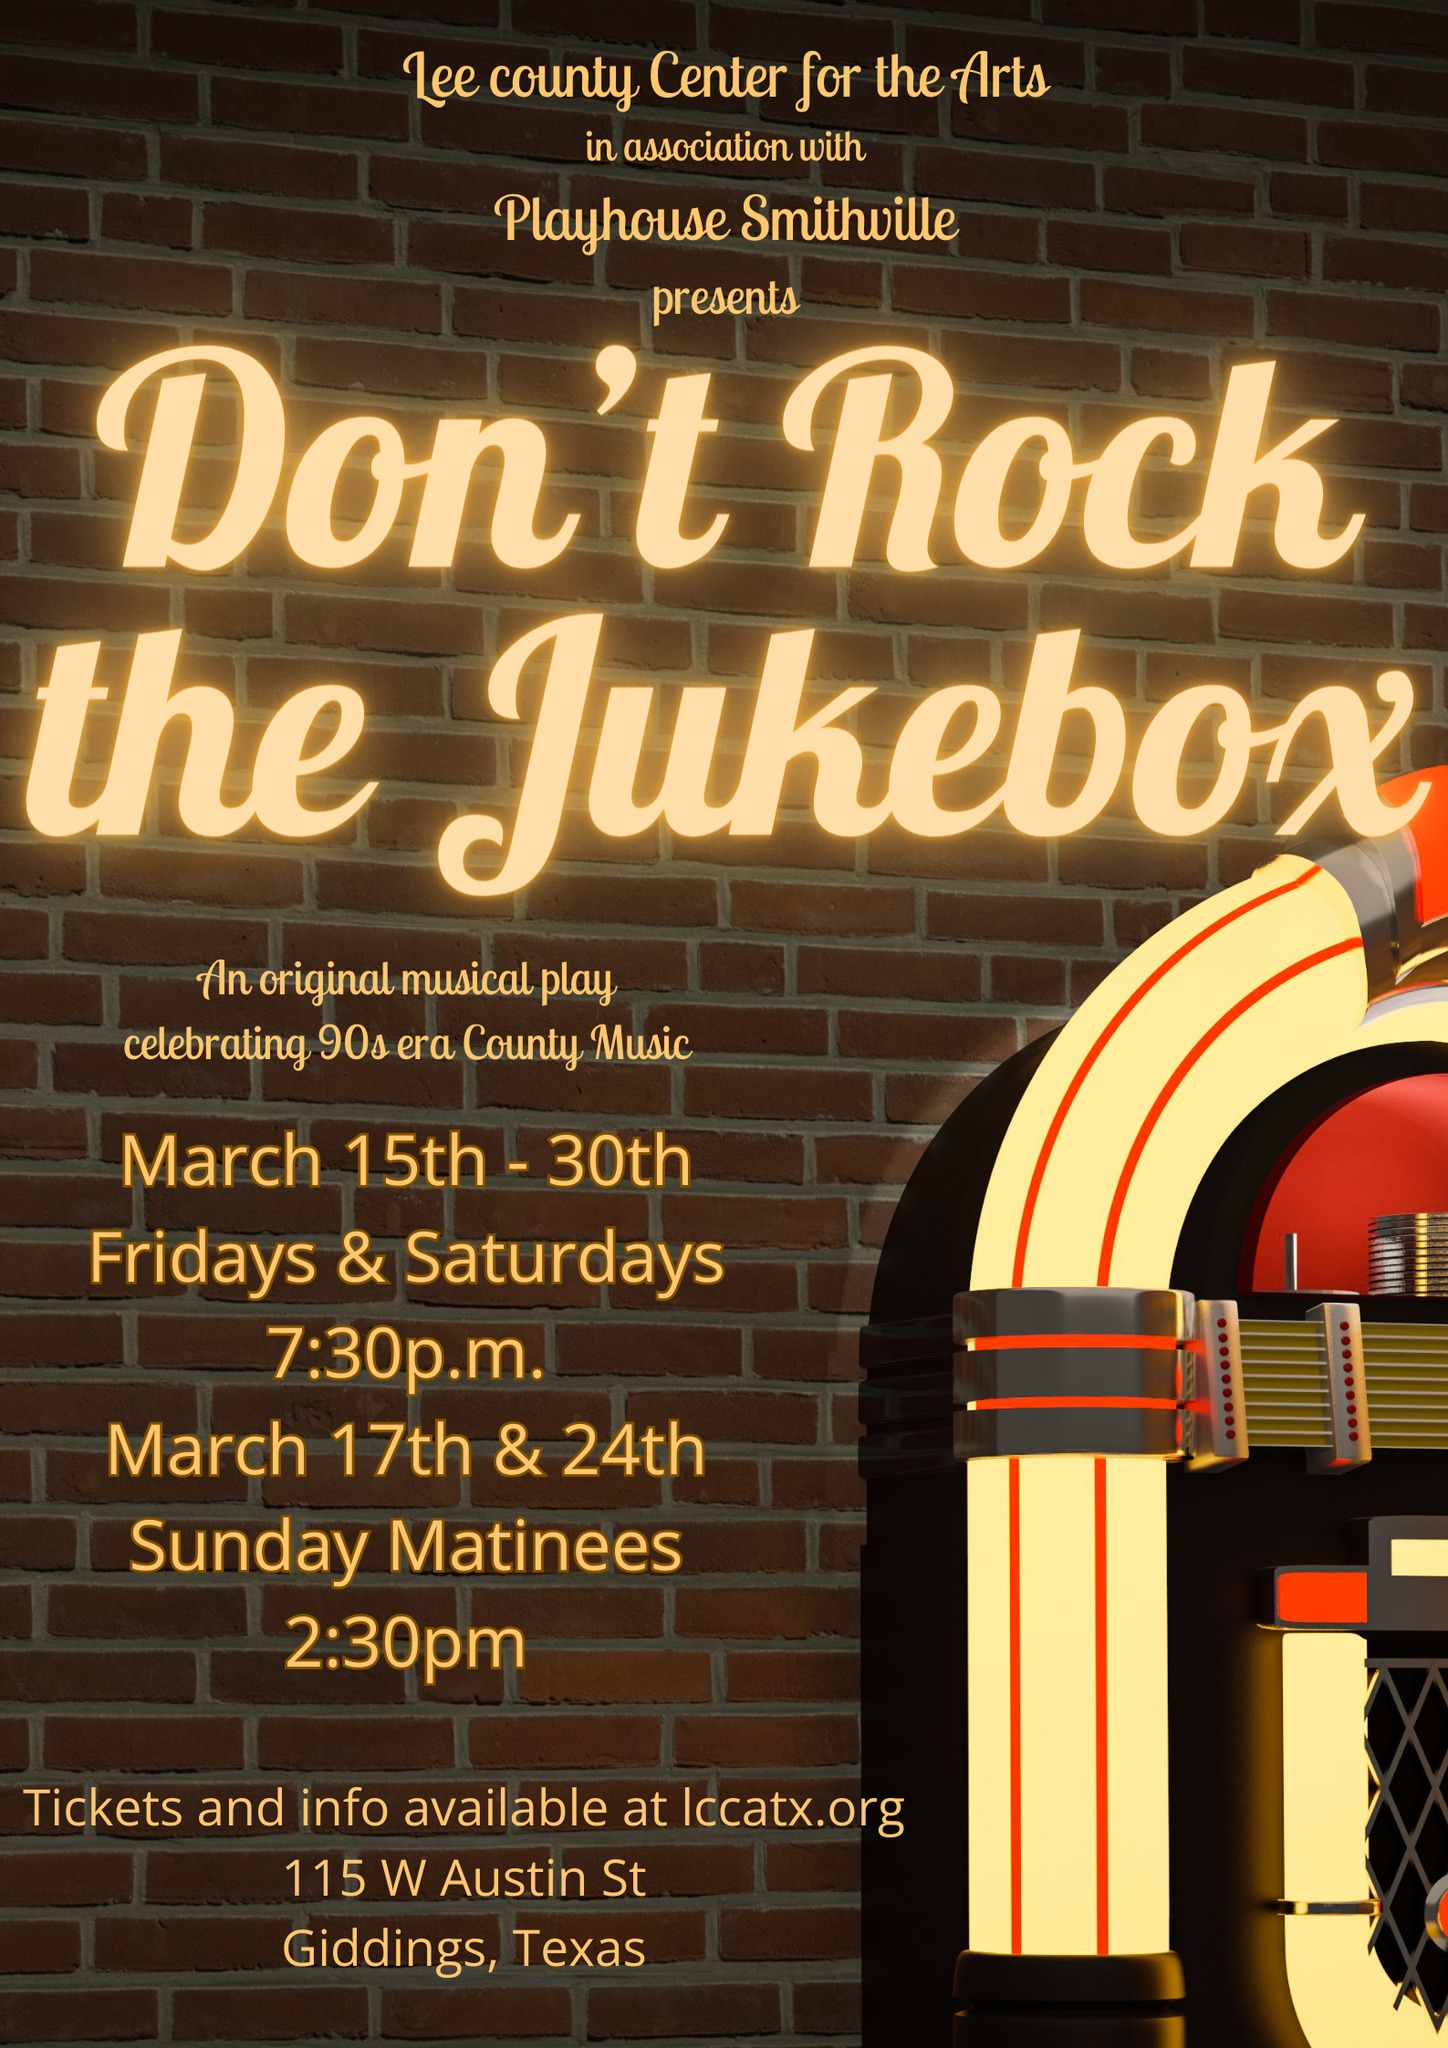 Don't Rock the Jukebox by Playhouse Smithville